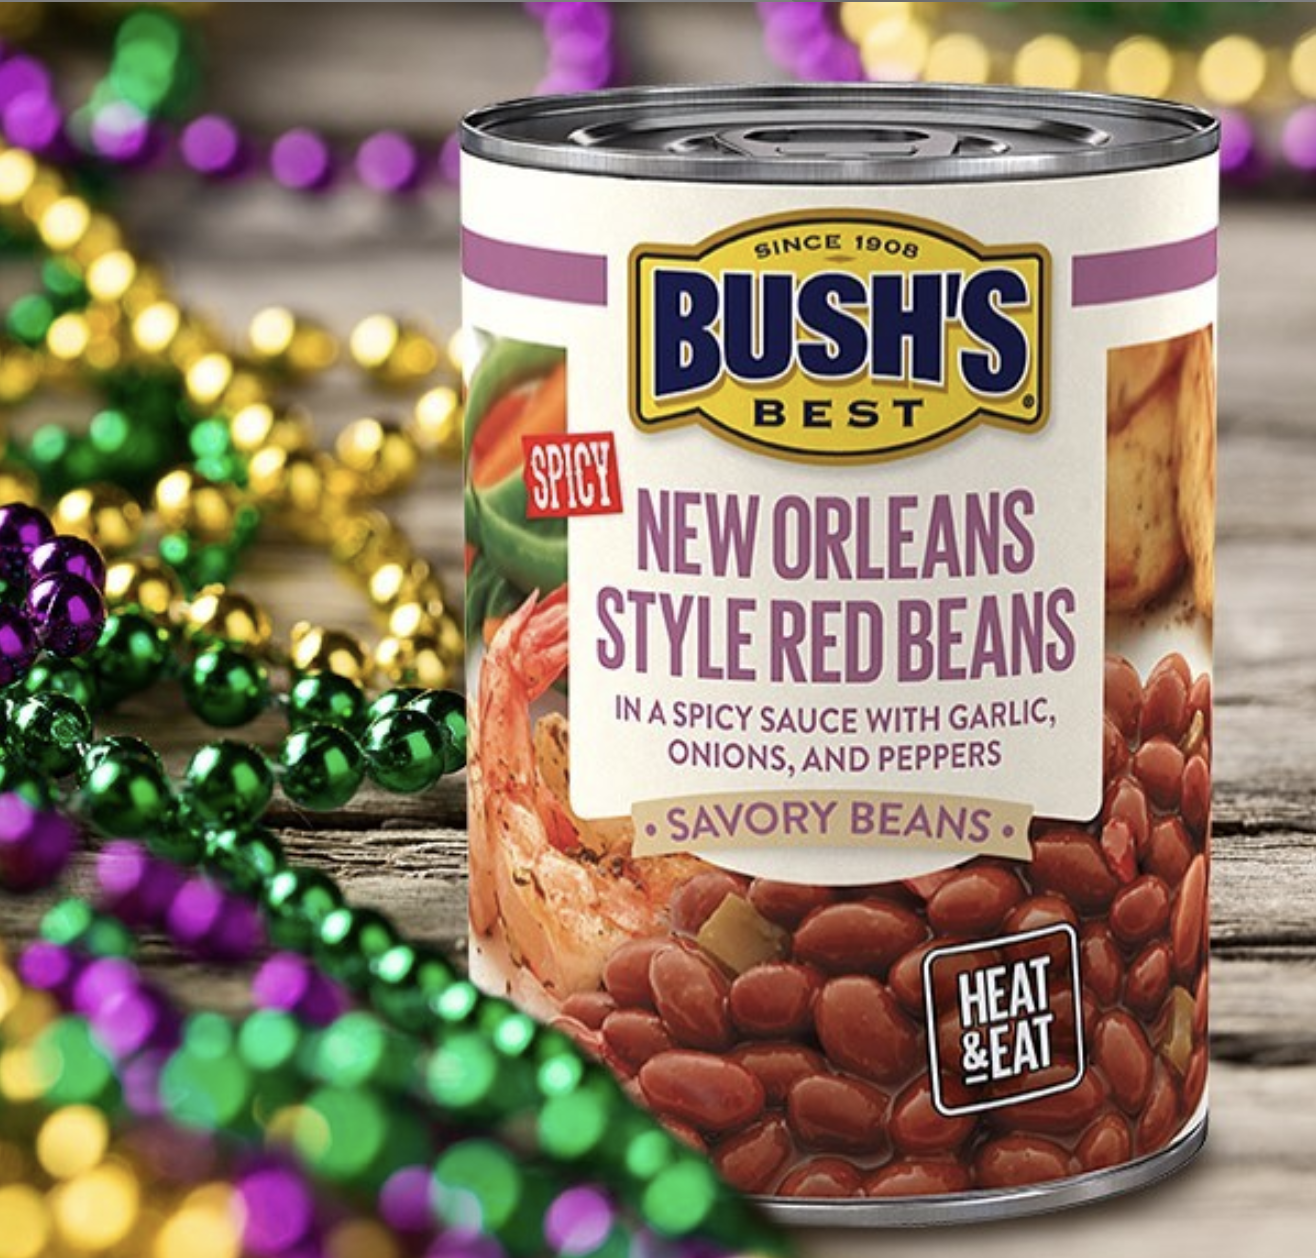 Wish you were in NOLA for #mardigras? Let BUSH'S New Orleans Style Red Beans take you there 🎉